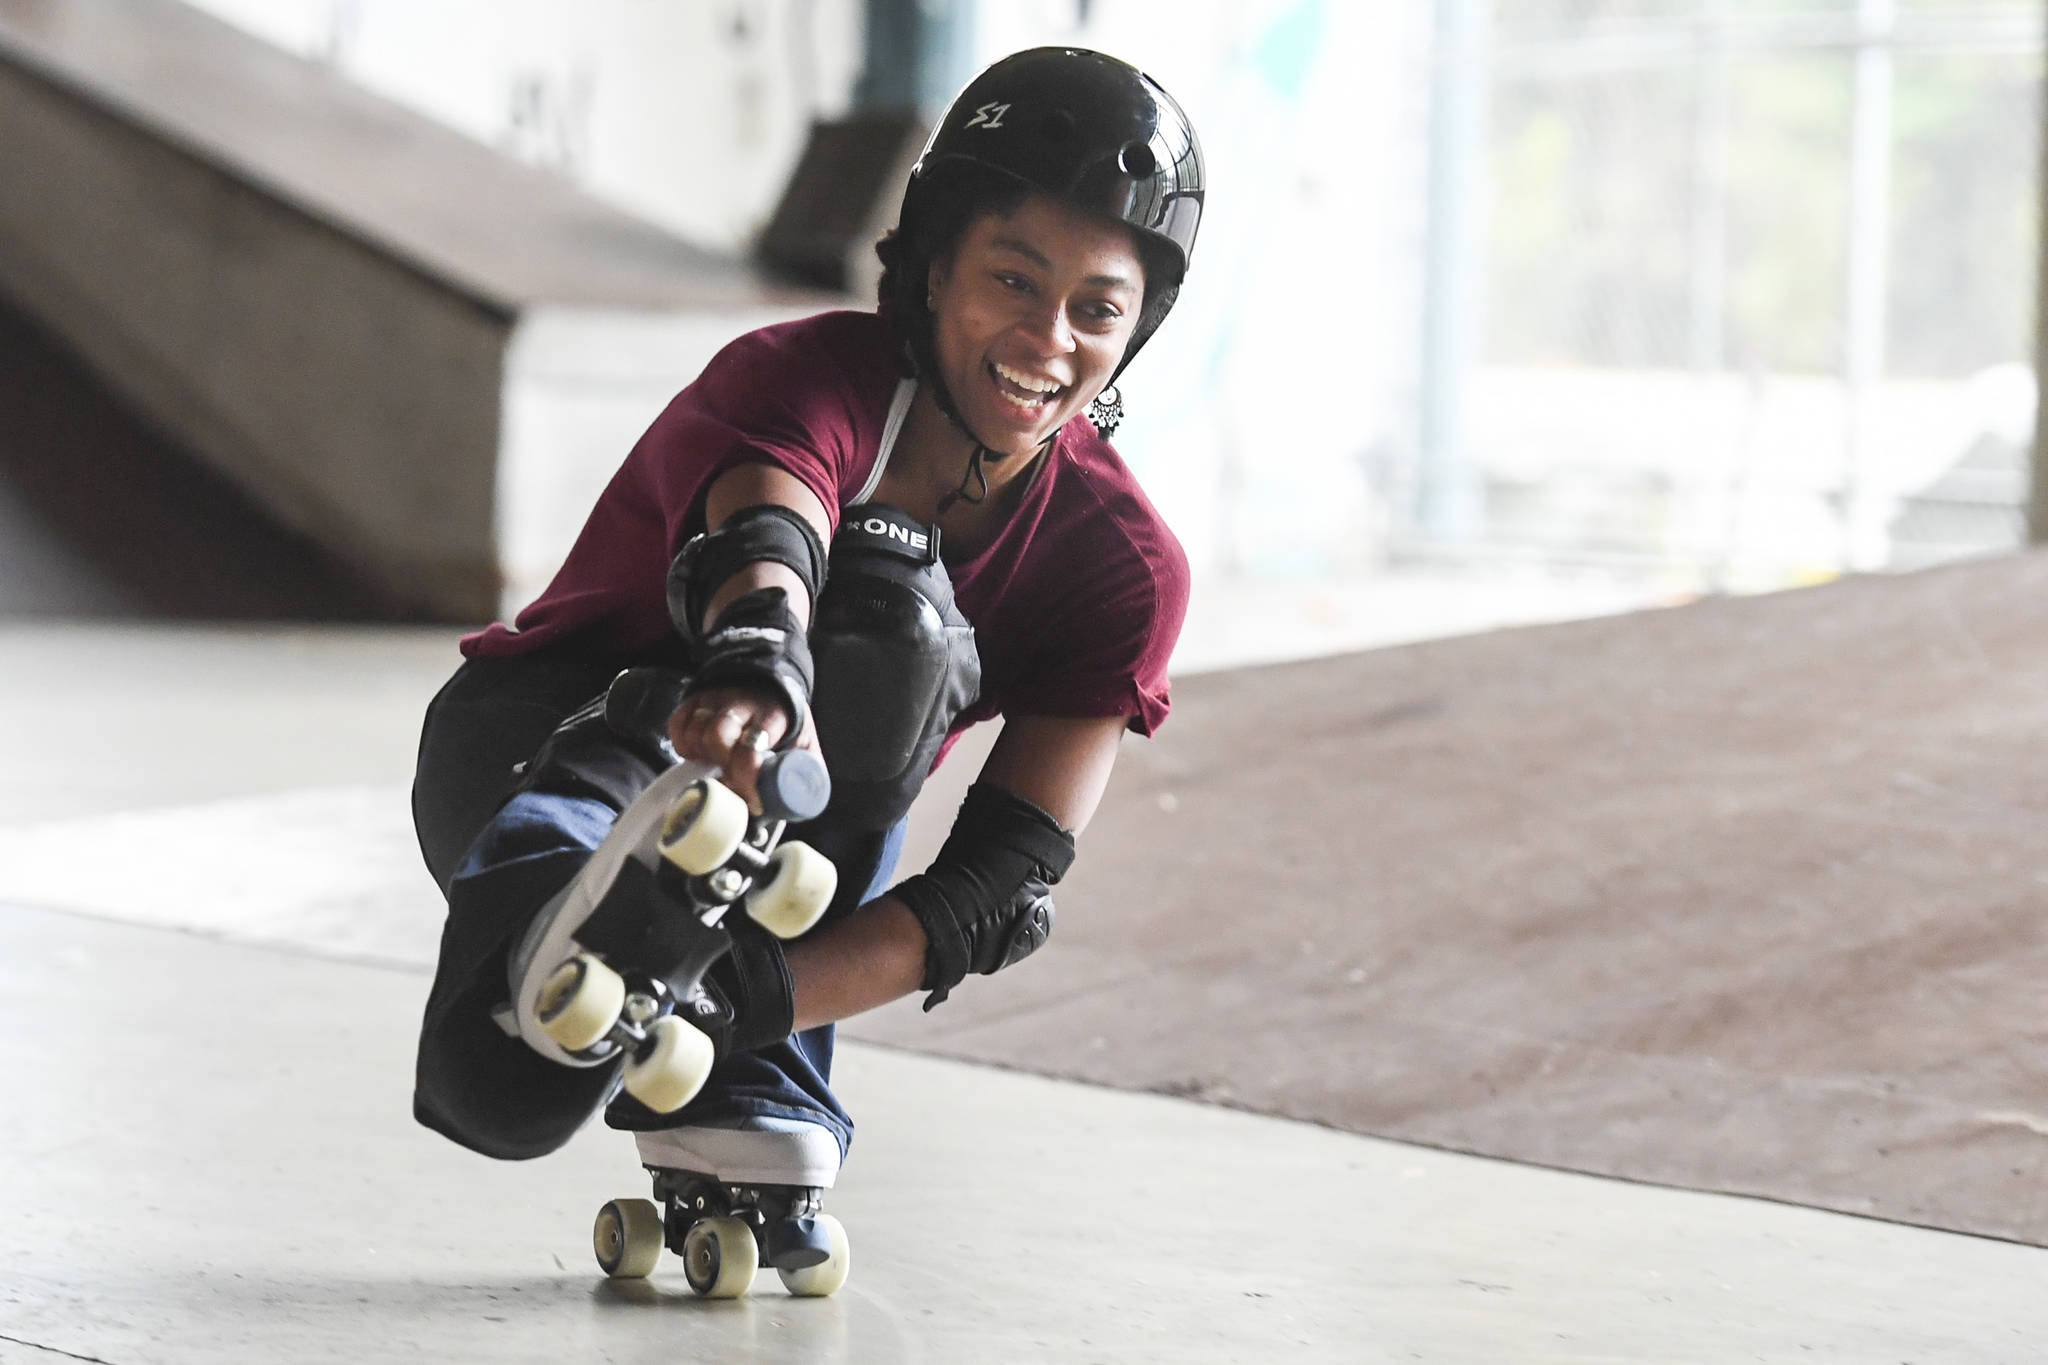 Photos: Learning to skate with the Rollergirls